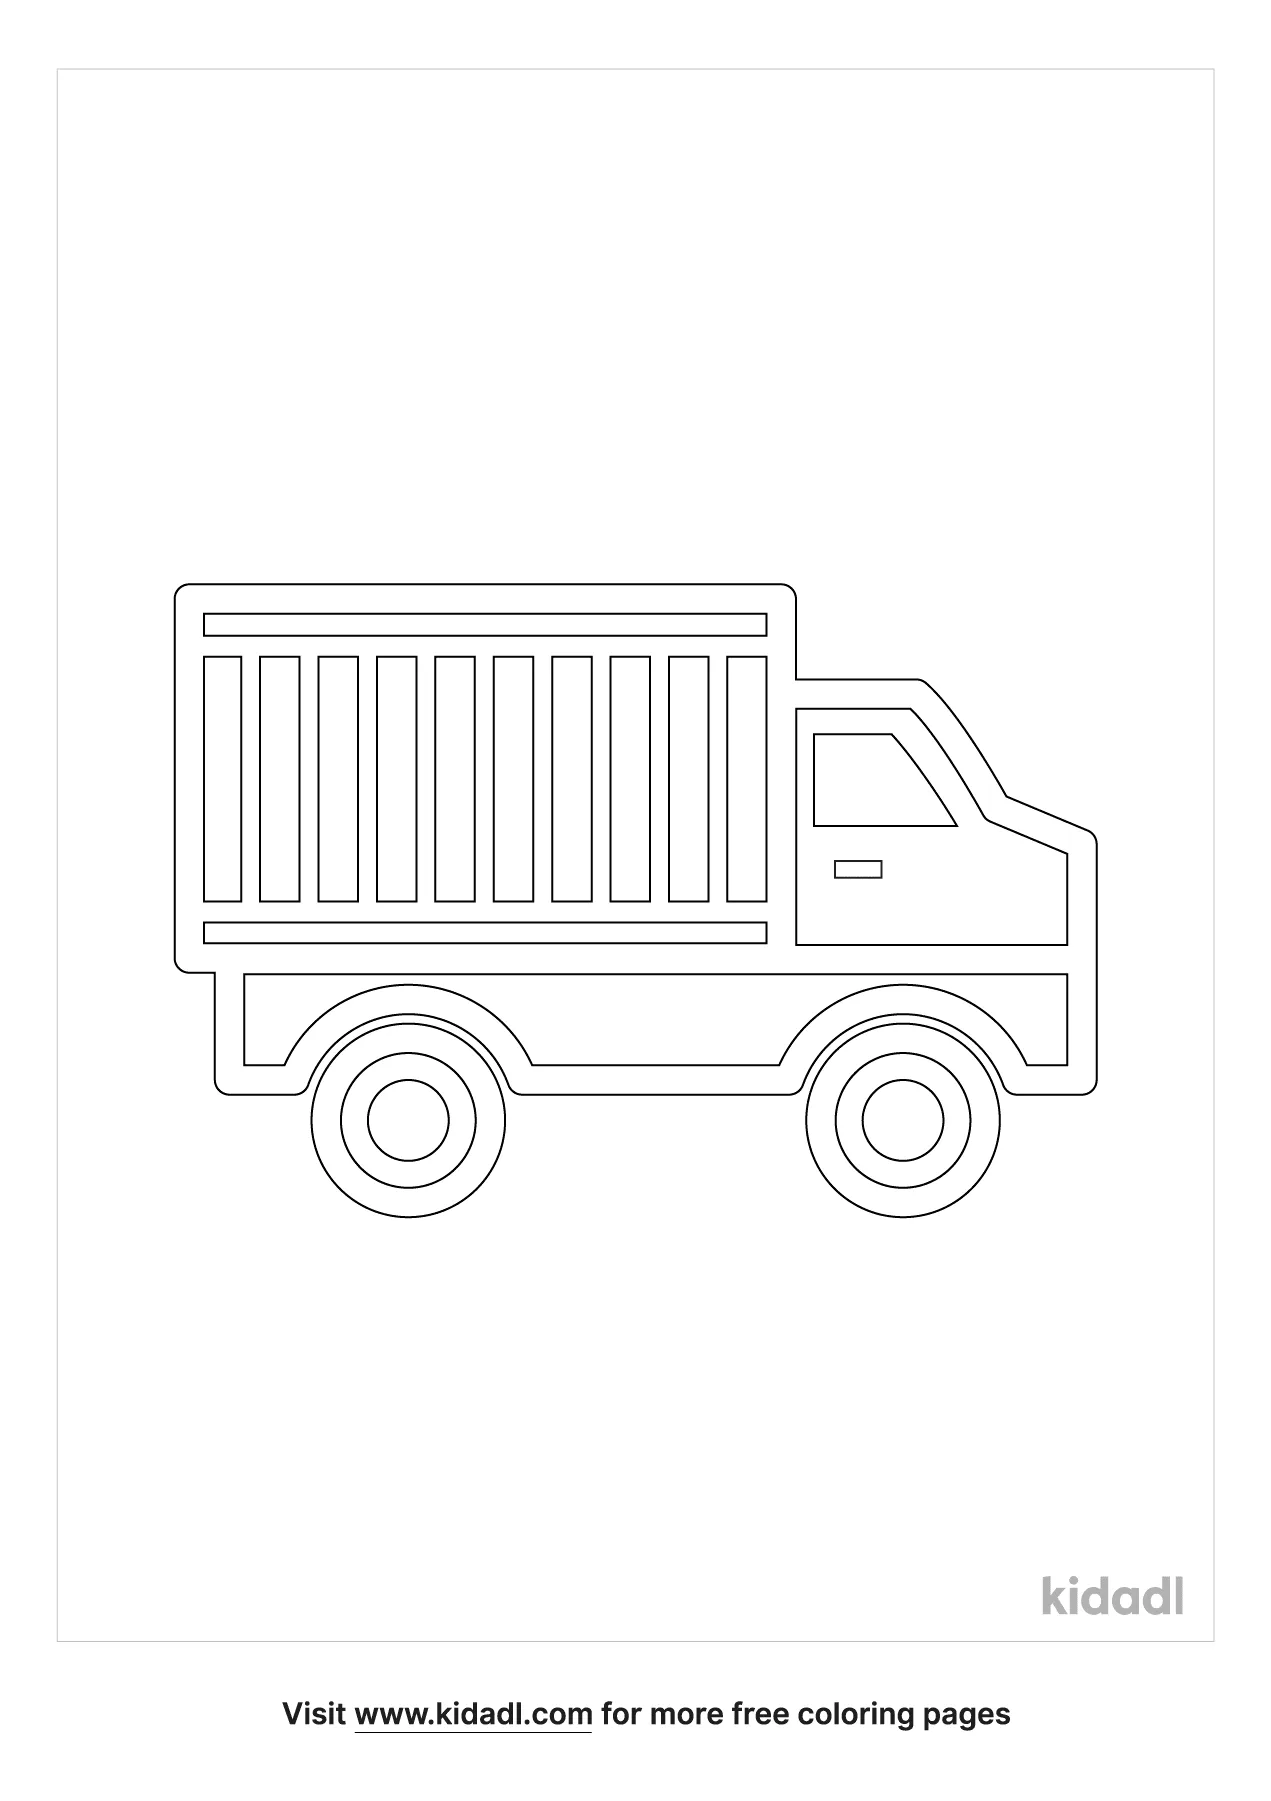 Simple Truck Coloring Page